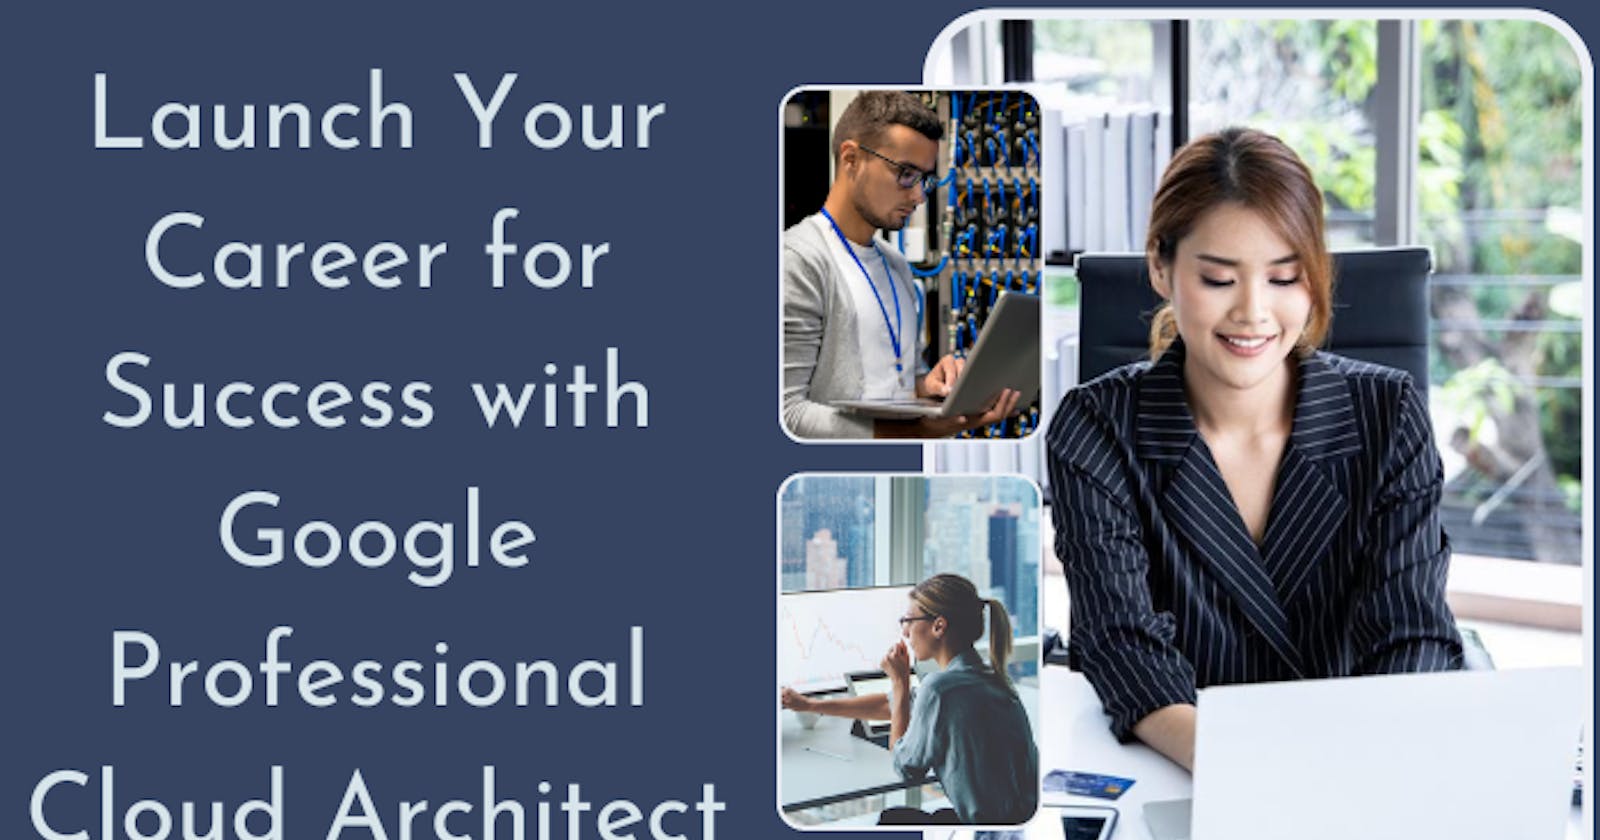 Google Professional Cloud Architect: A Vital Role for Success in the Cloud